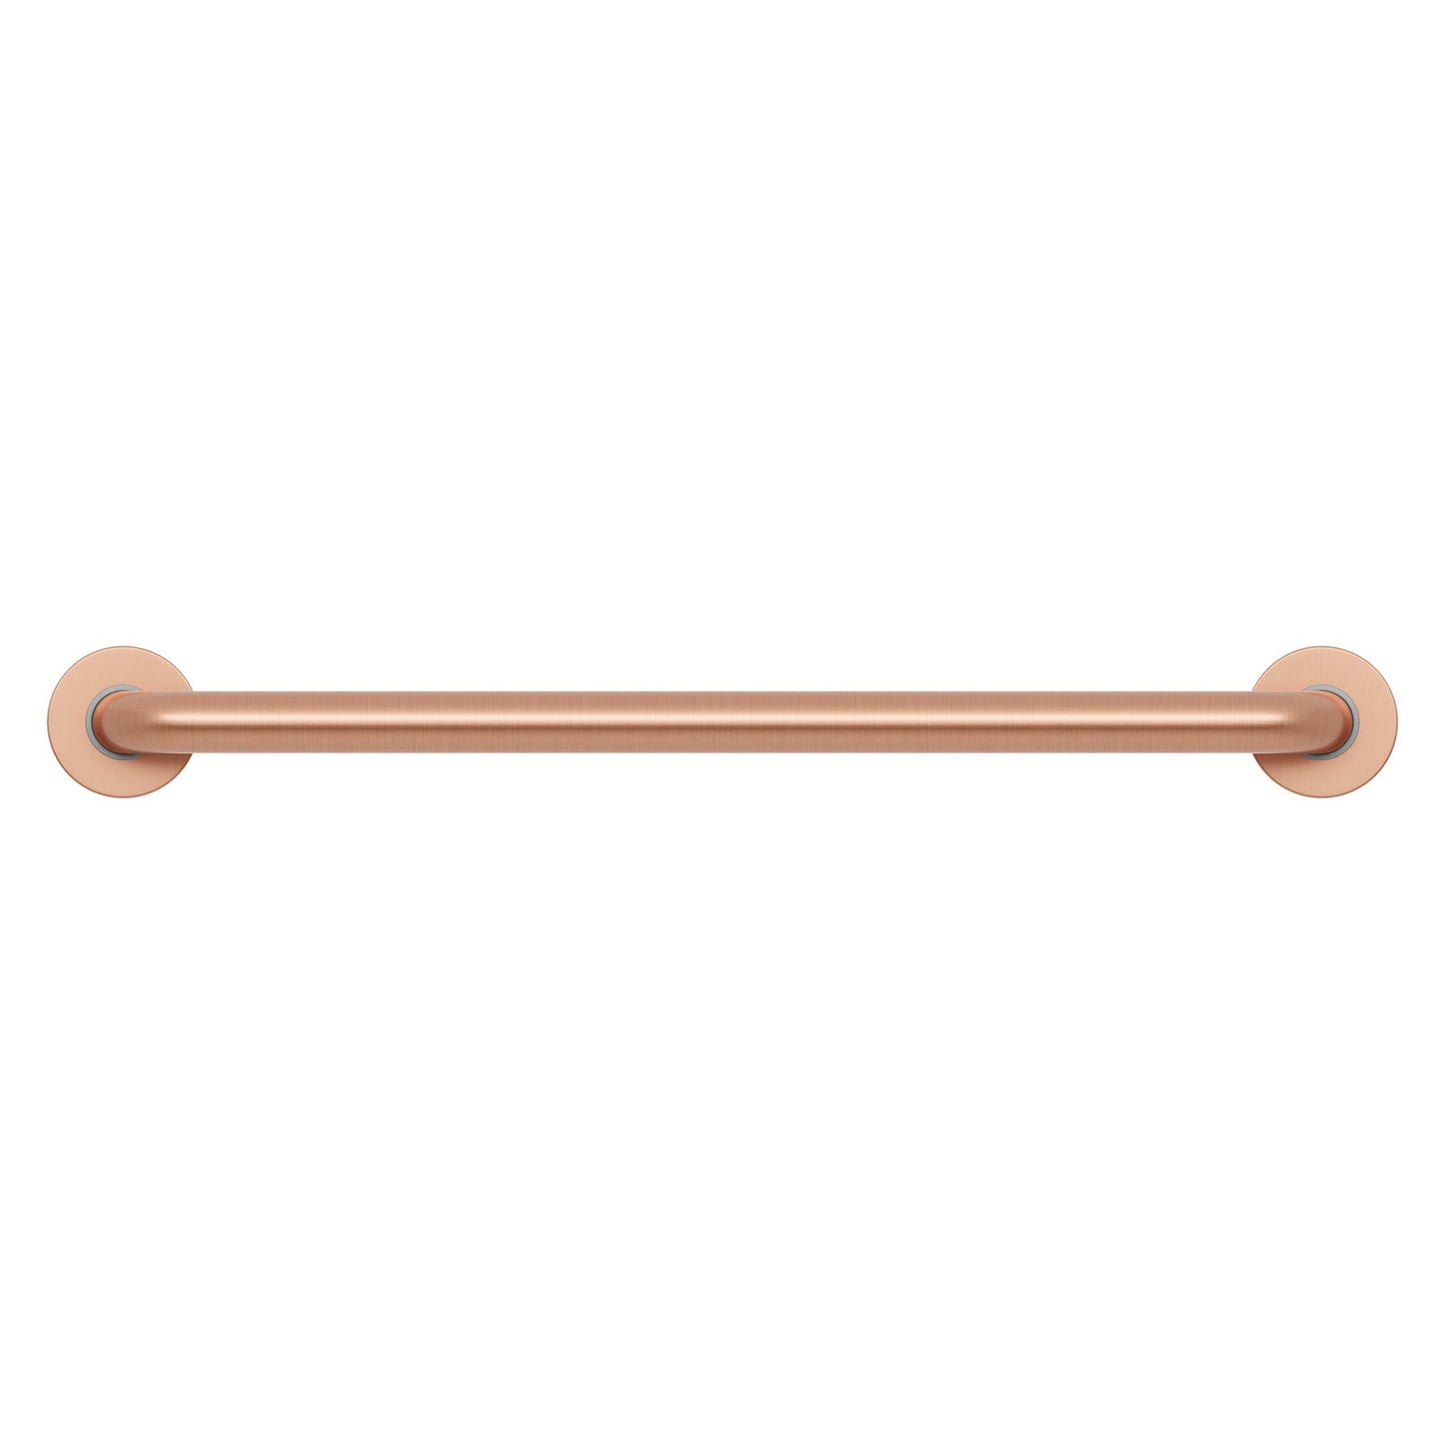 Evekare 24" x 1.25" Stainless Steel Concealed Mount Grab Bar in Brushed Rose Gold